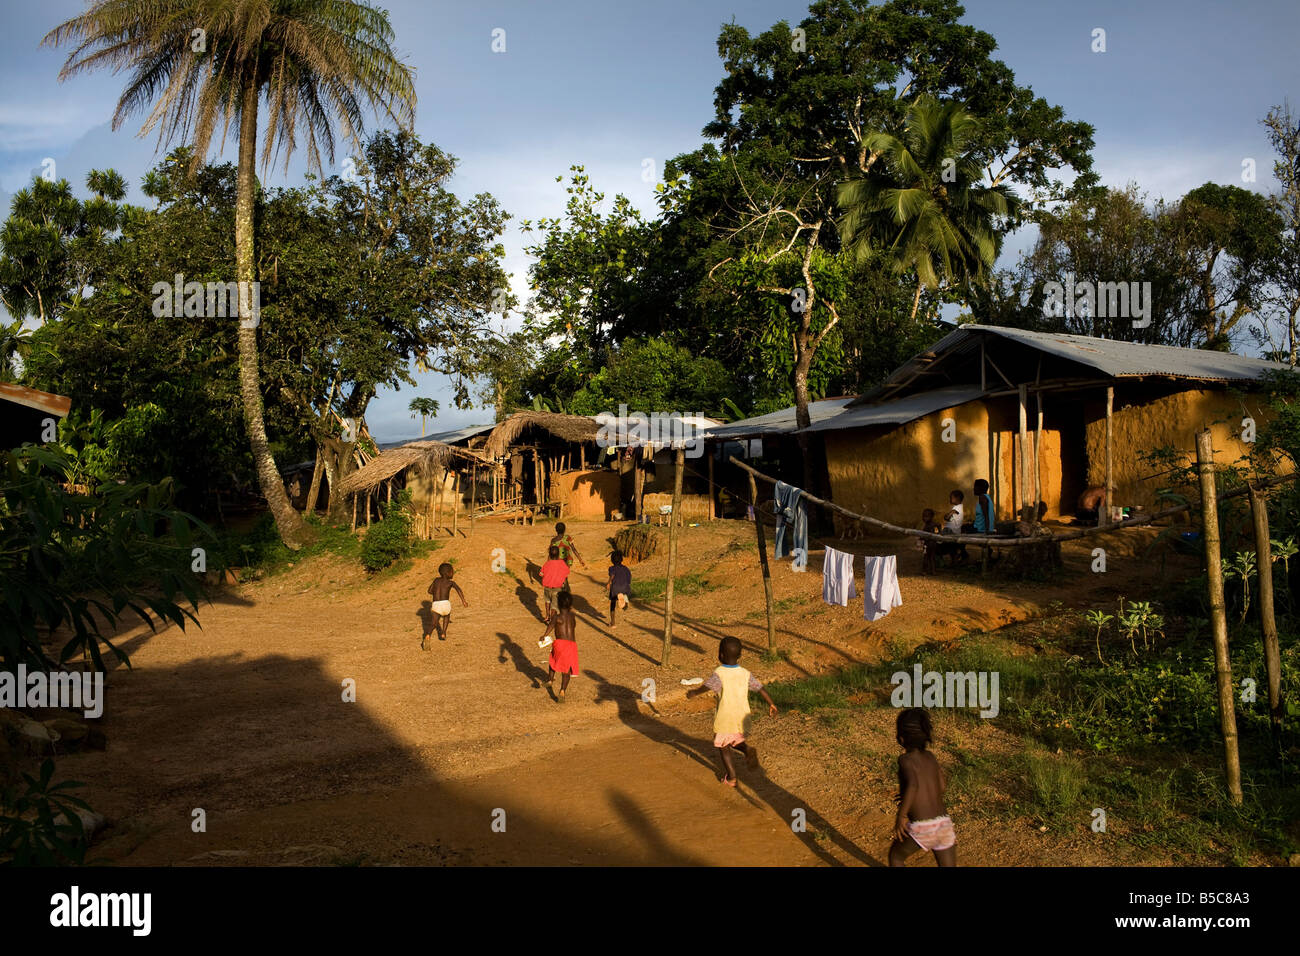 Kids at the end of the day in Kingsville Kingsville Liberia West Africa Stock Photo